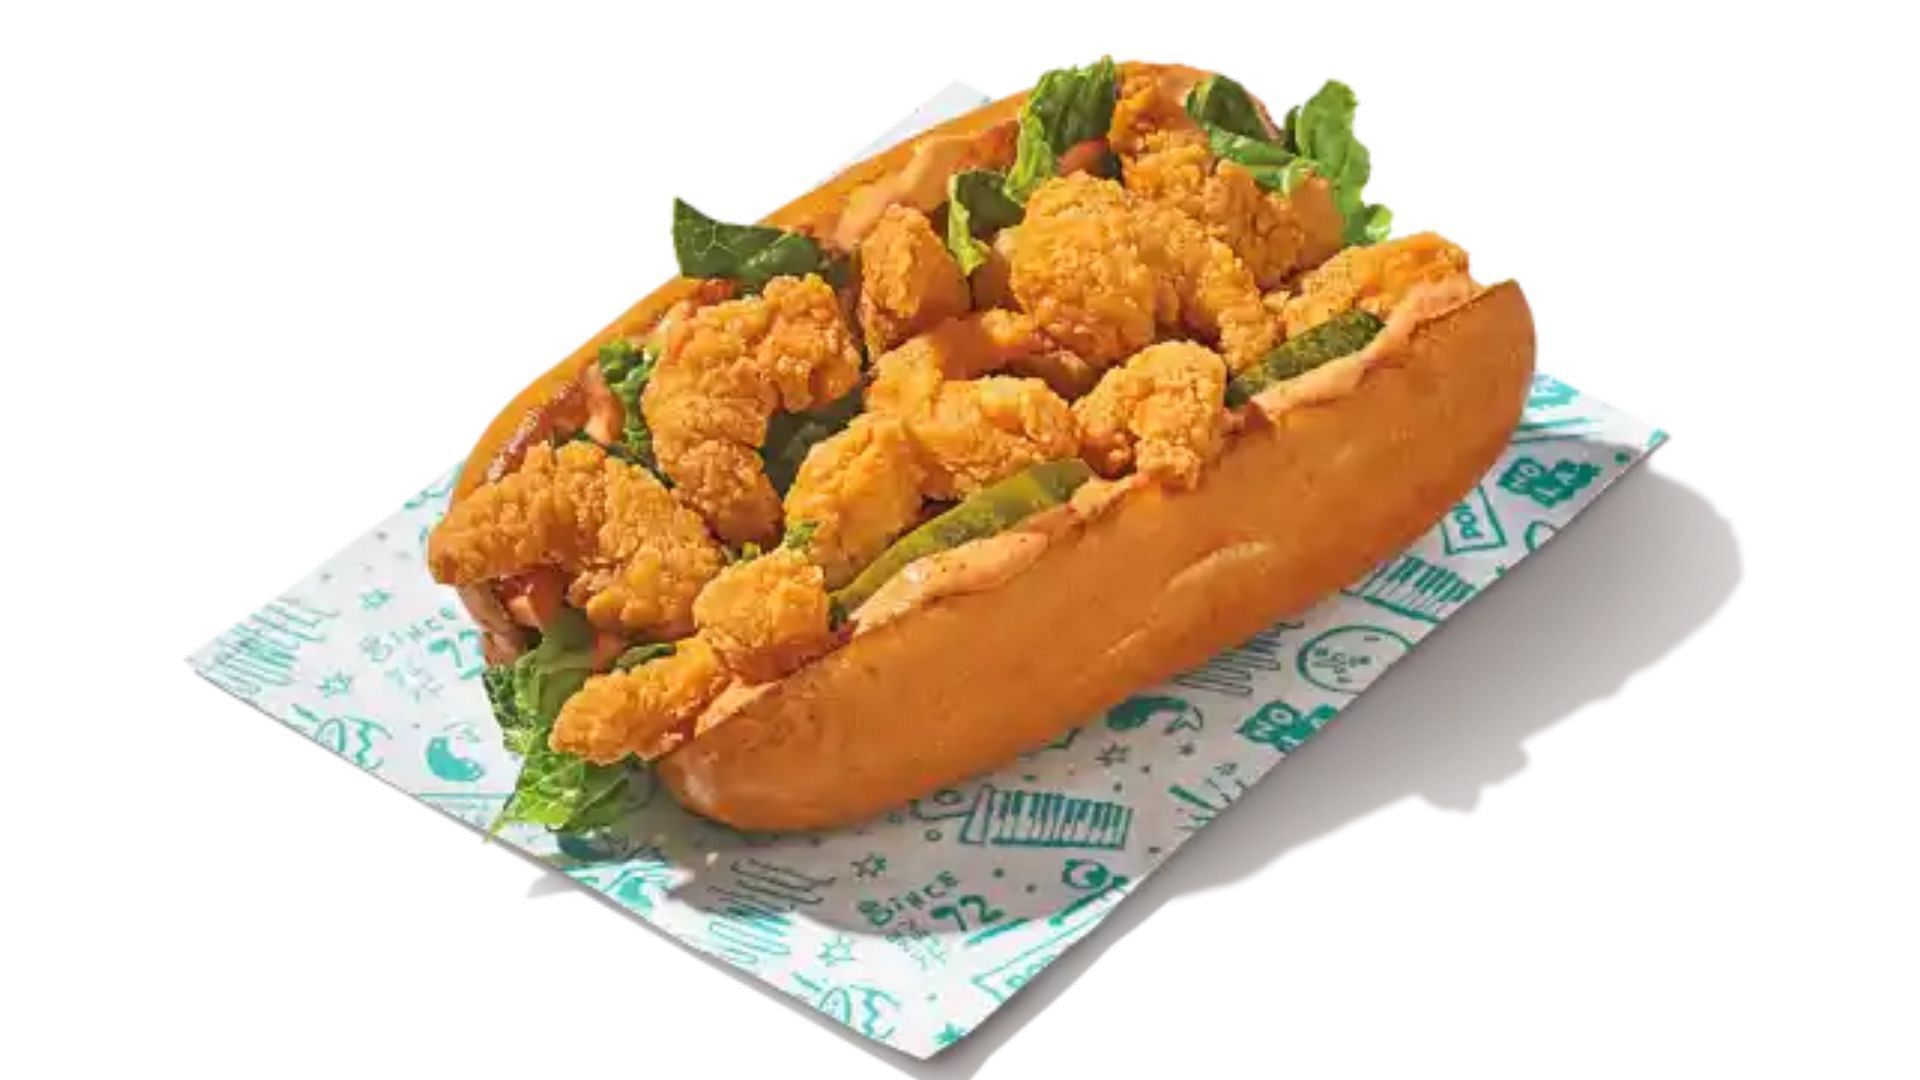 Popeyes introduces new Shrimp Roll to its seafood menu